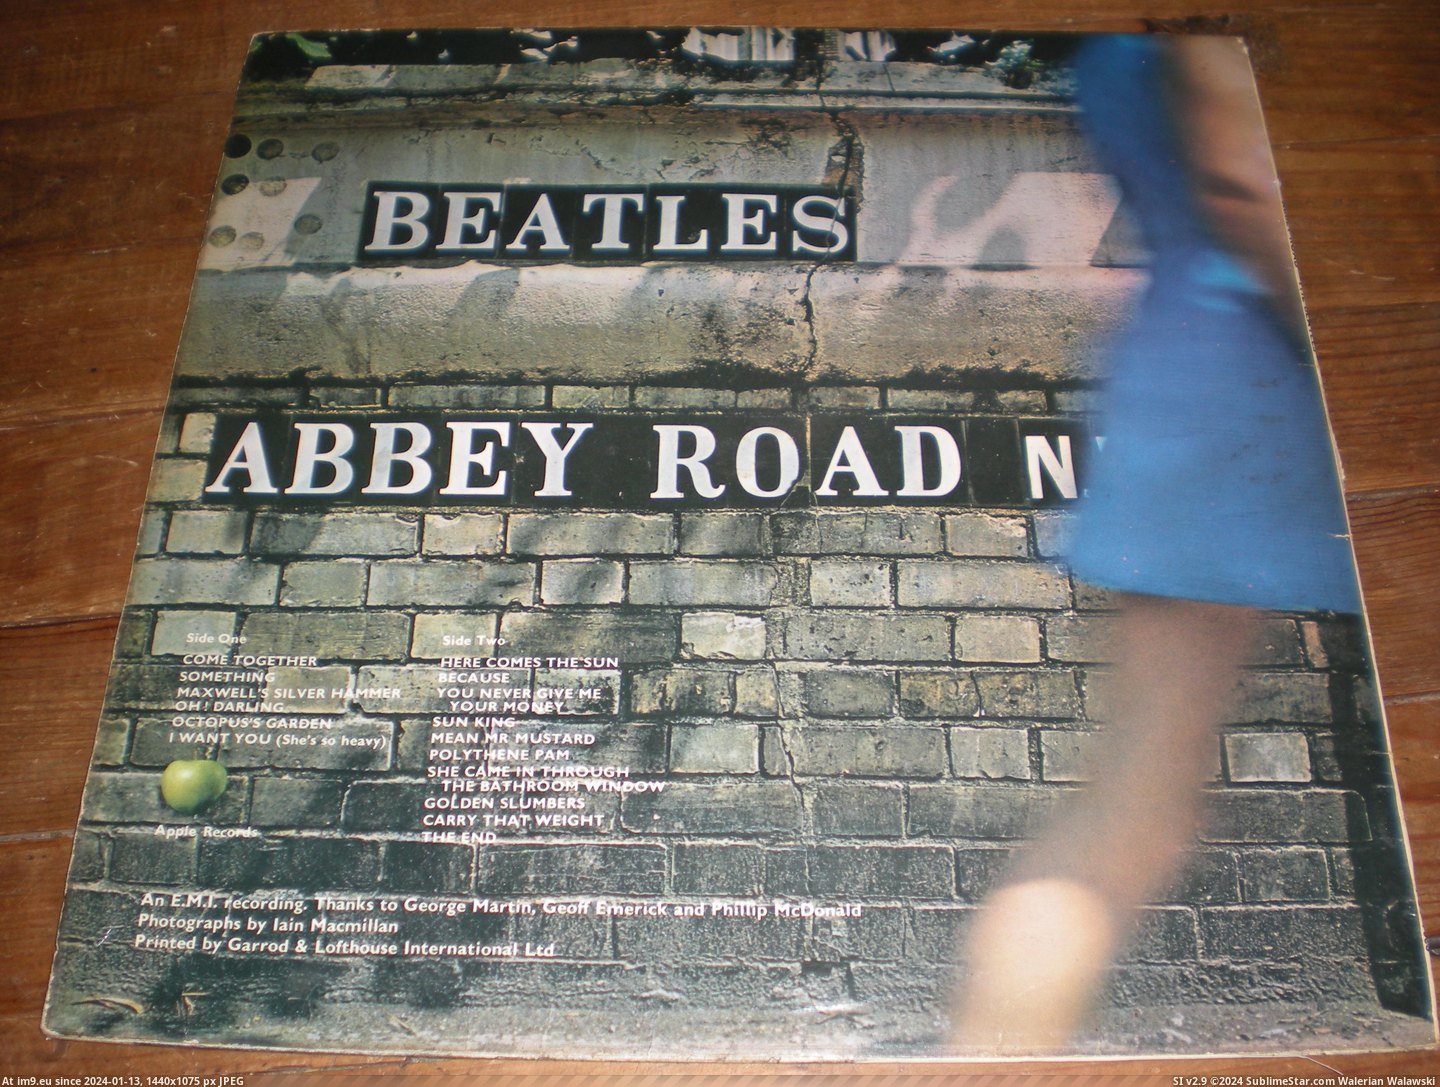  #Abbey  Abbey 13-05-14 2 Pic. (Image of album new 1))